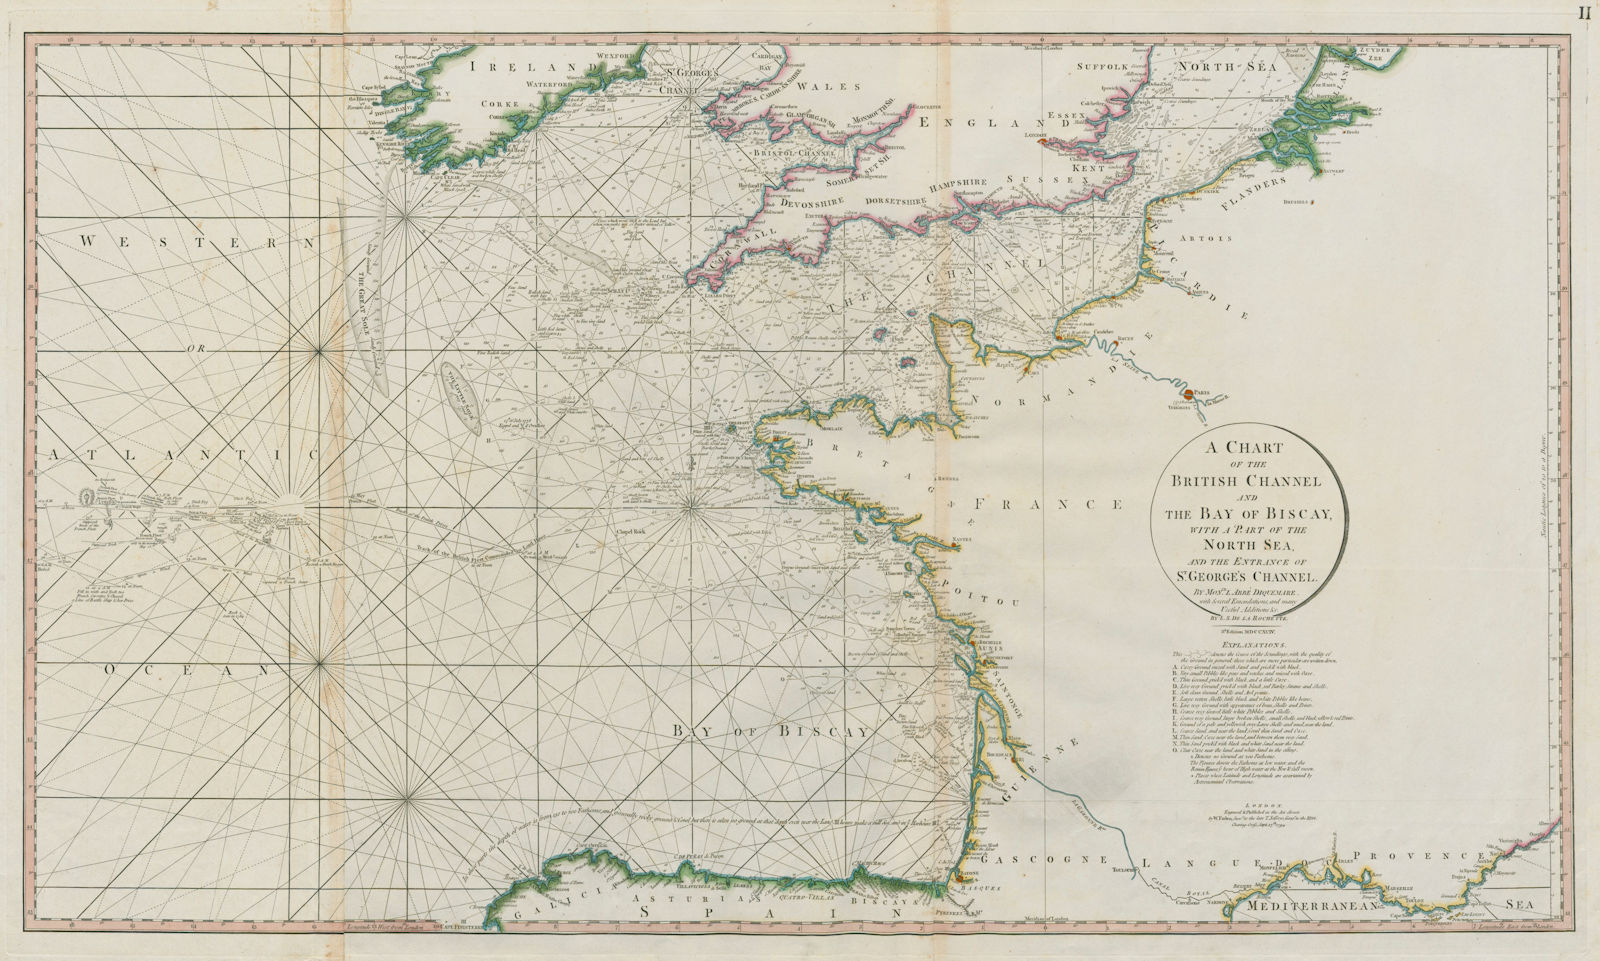 A chart of the British Channel & the Bay of Biscay… FADEN /DELAROCHETTE 1794 map